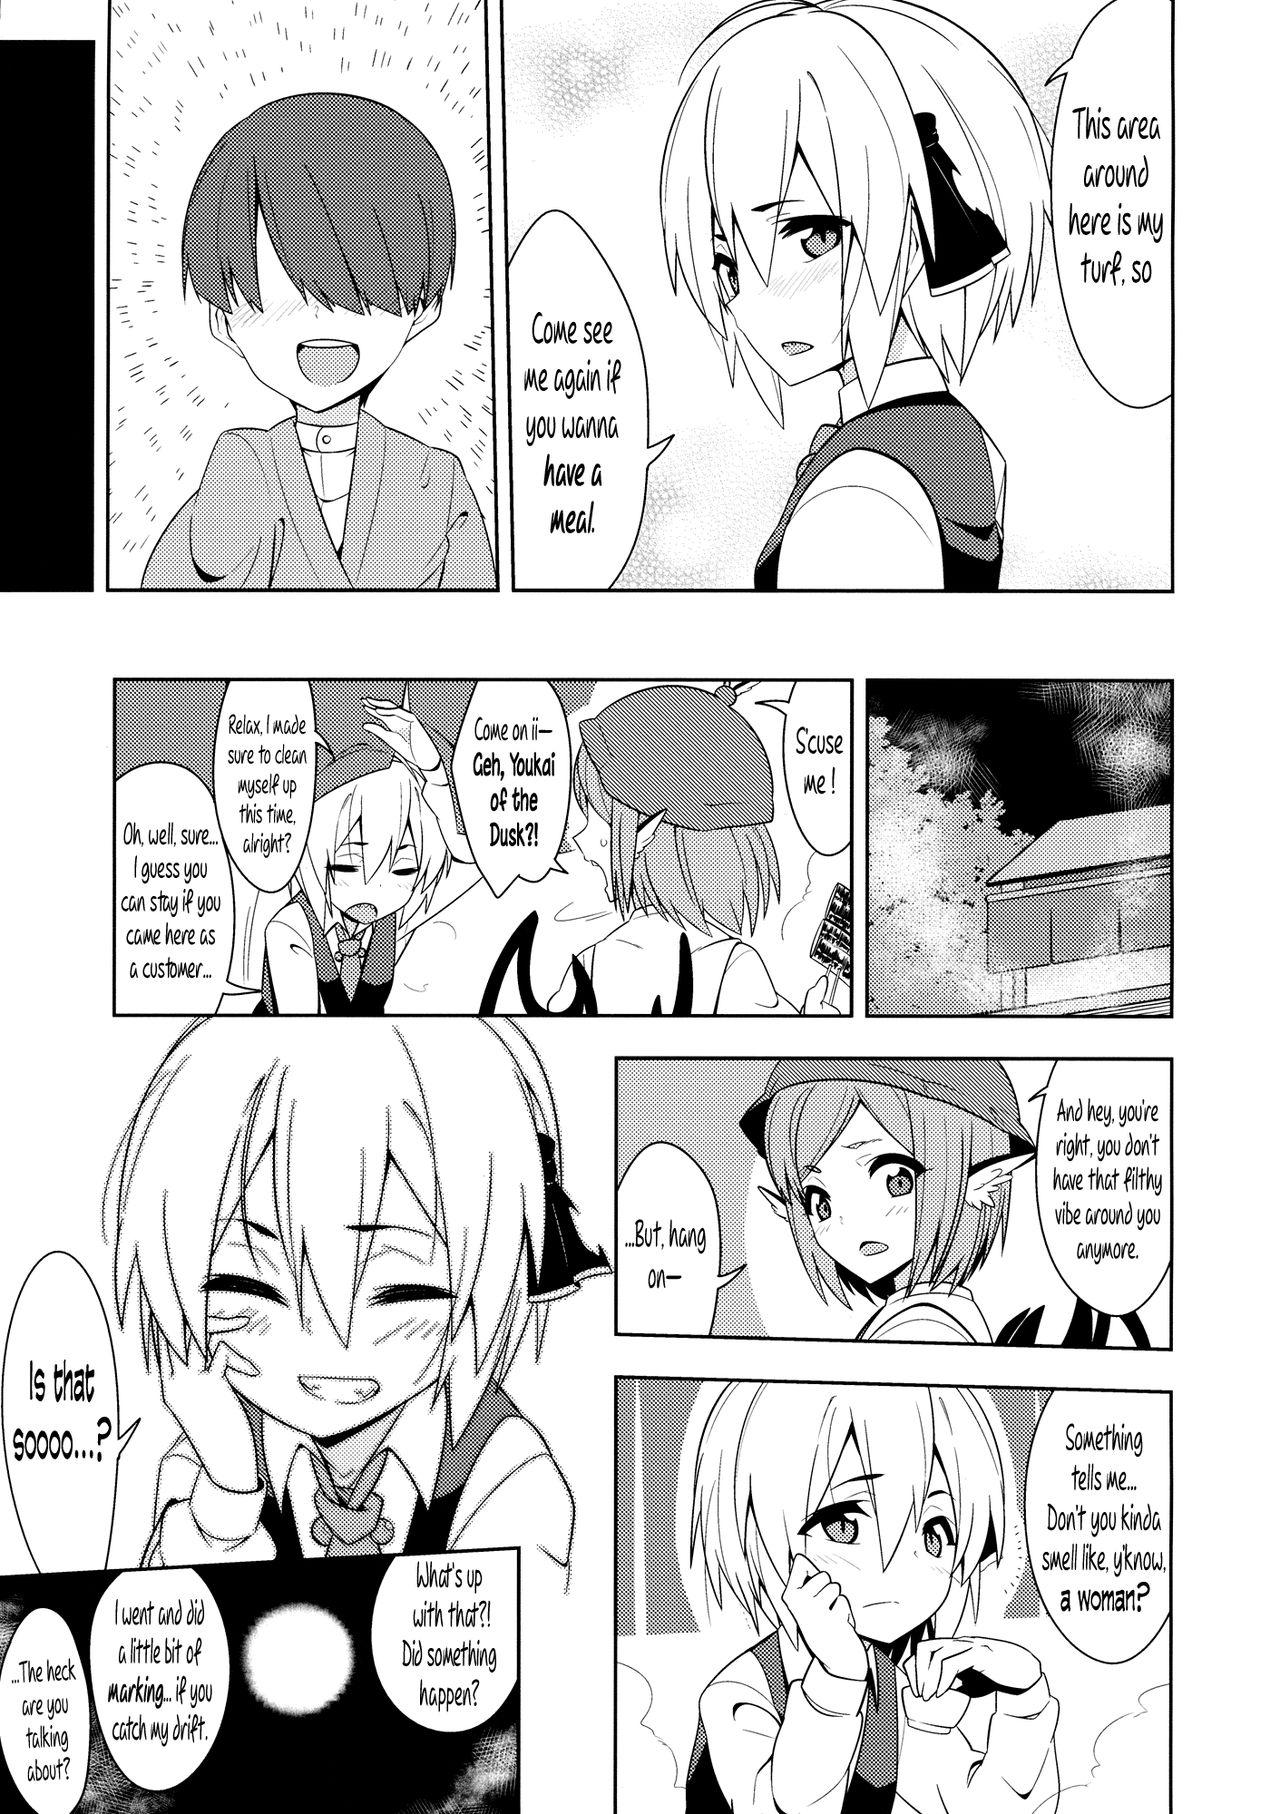 Realitykings Rumia Aratta？| Have you washed, Rumia? - Touhou project Bigbooty - Page 24